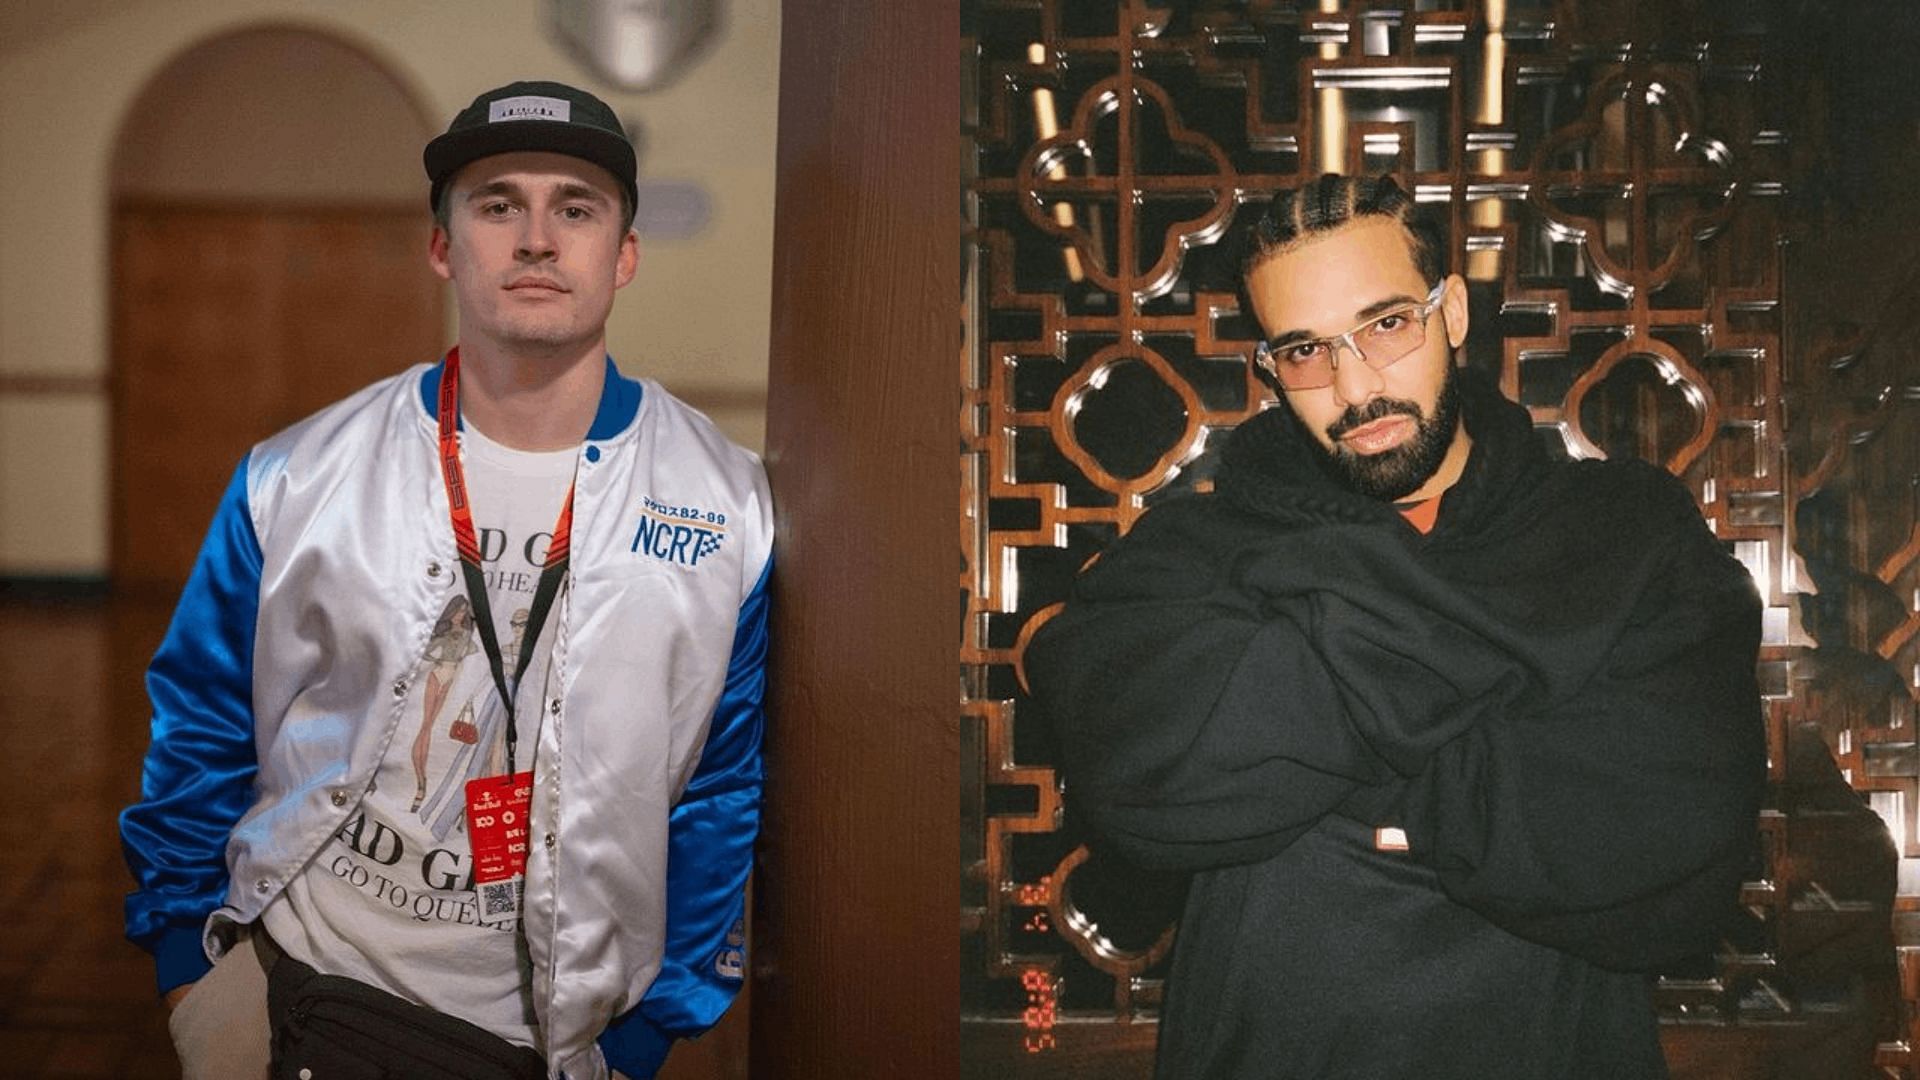 Ludwig revealed that he was copyright striked while listening to both artists on stream (Image via ludwigahgren and champagnepapi/Instagram)